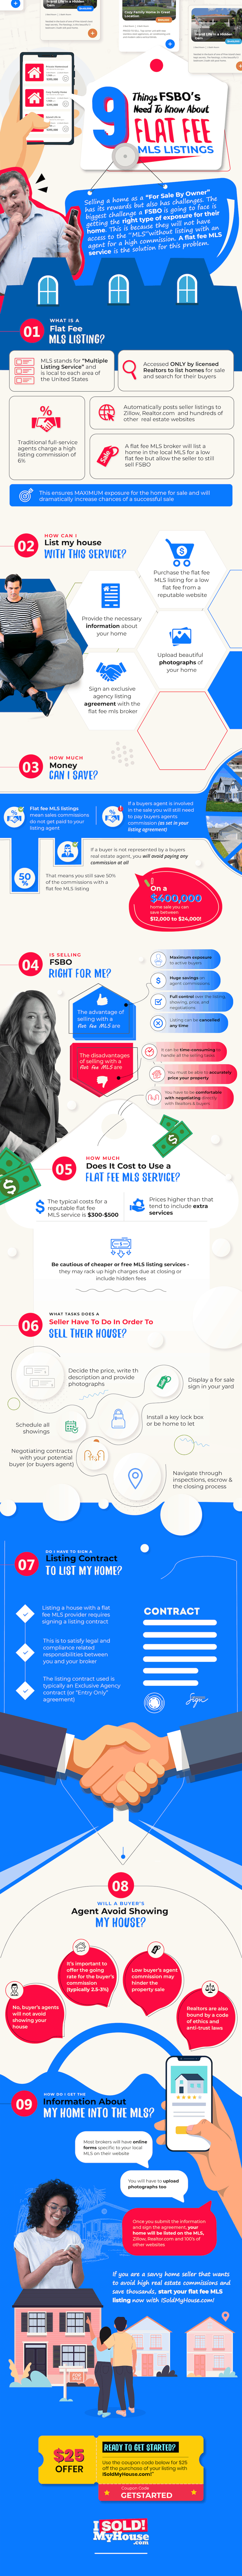 infographic that shows the 9 things fsbos need to know about flat fee mls listings